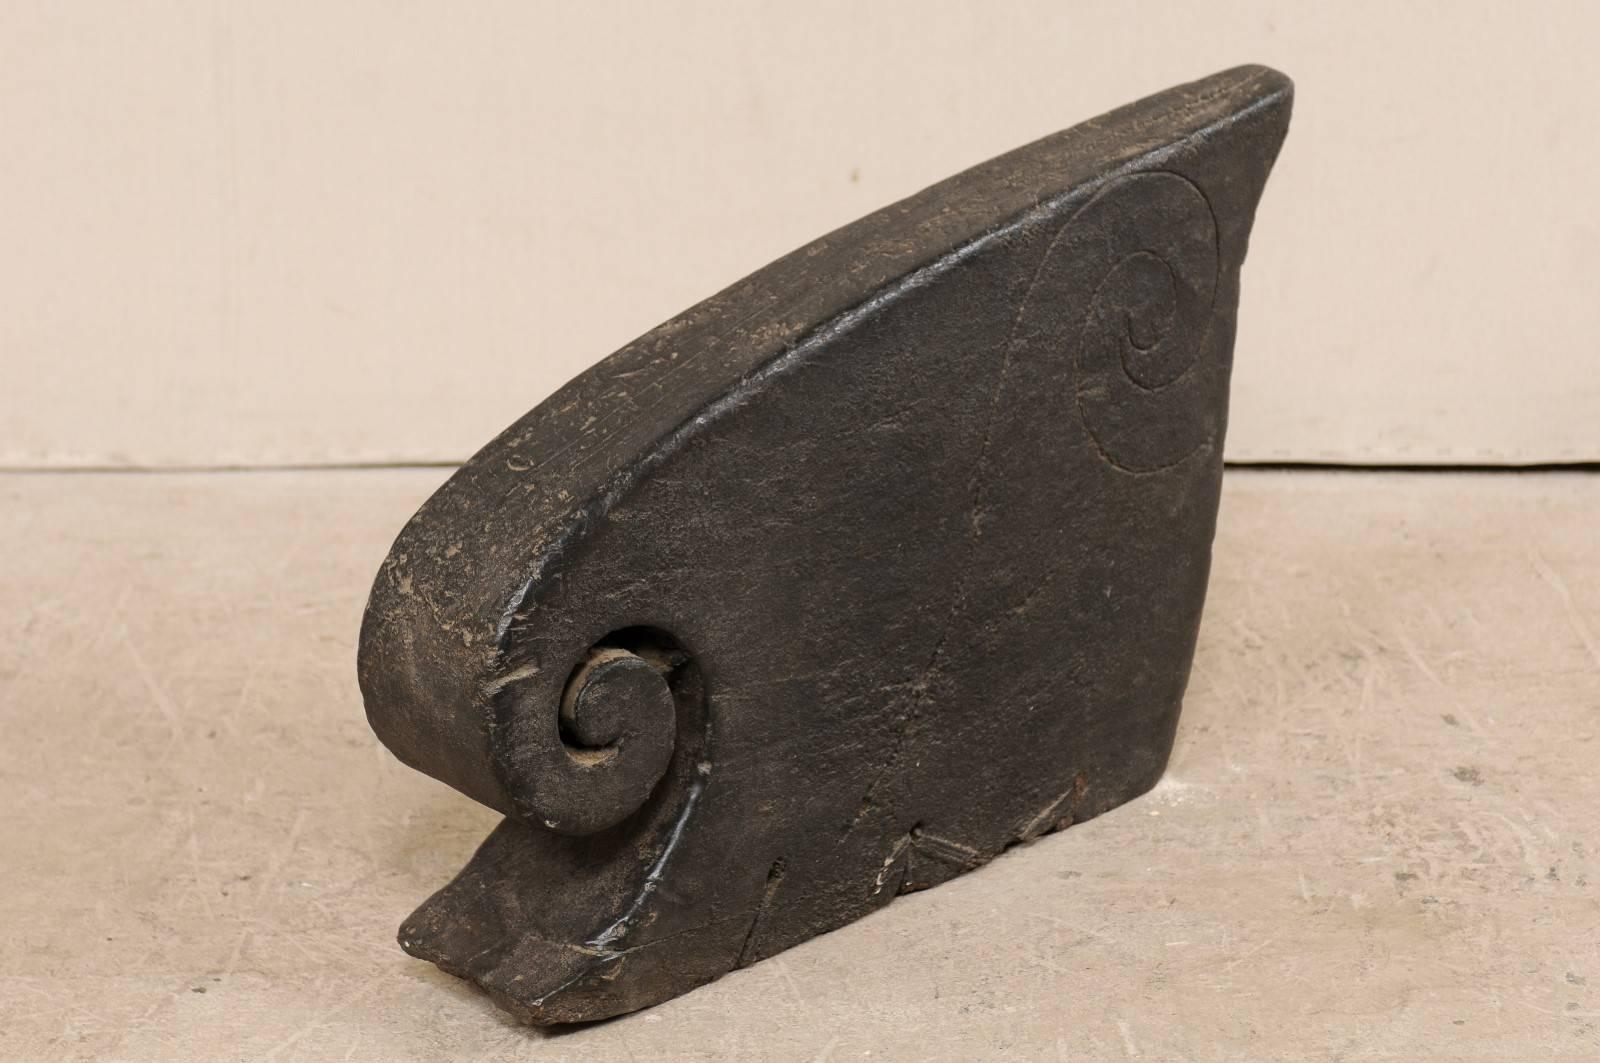 A South Indian (Kerala) wooden boat prow from the mid-20th century. This hand-carved boat prow from Kerala is adorn with curling volute and incised wave carvings at it's sides. These raised prows often decorated the boats of the Kerala, including